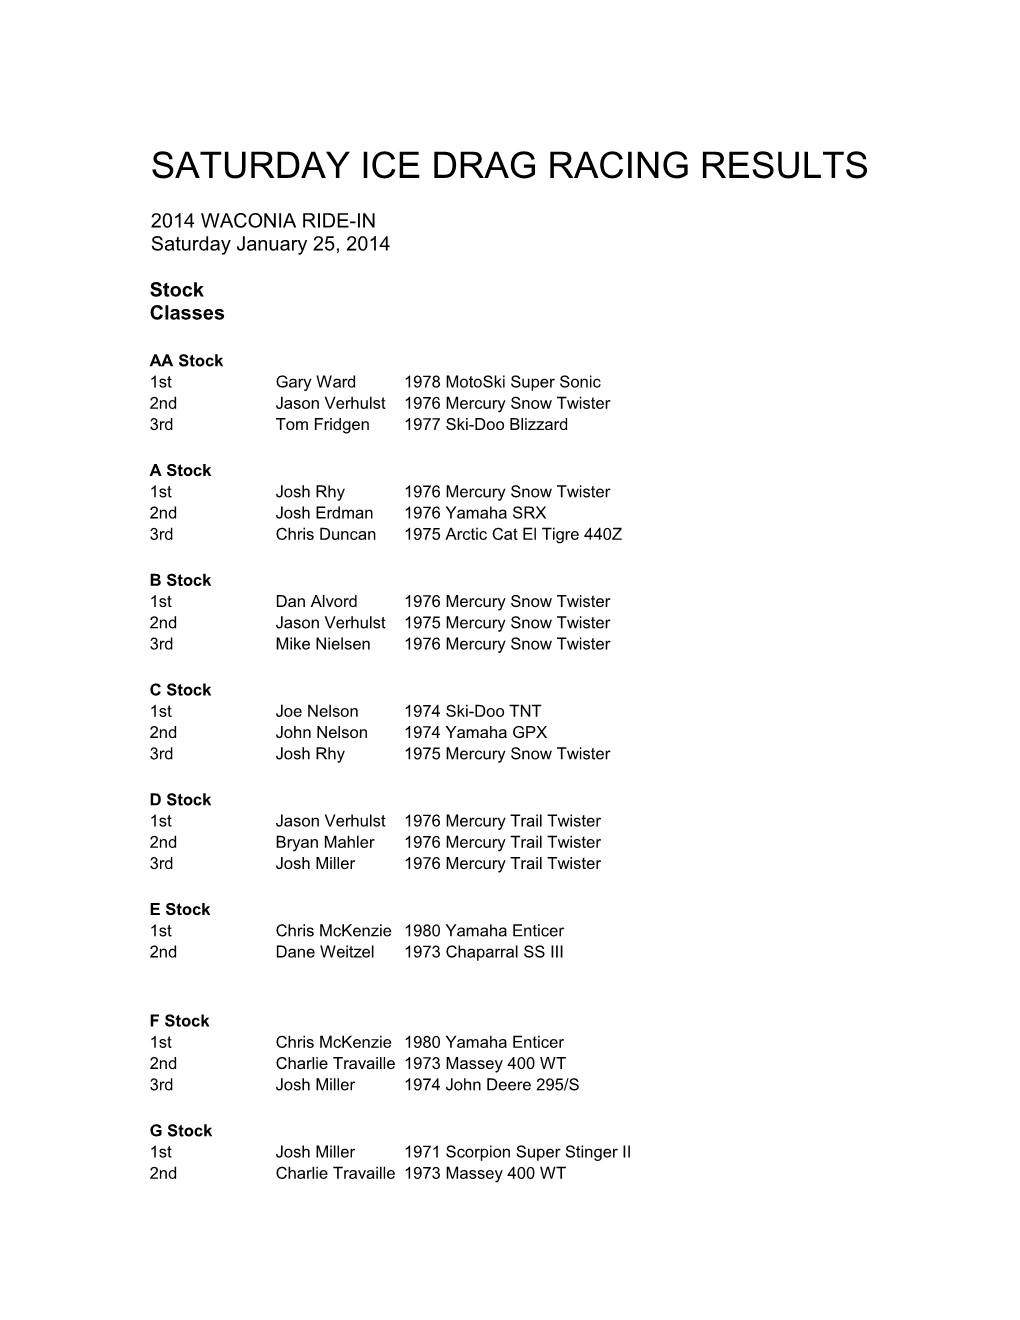 Saturday Ice Drag Racing Results